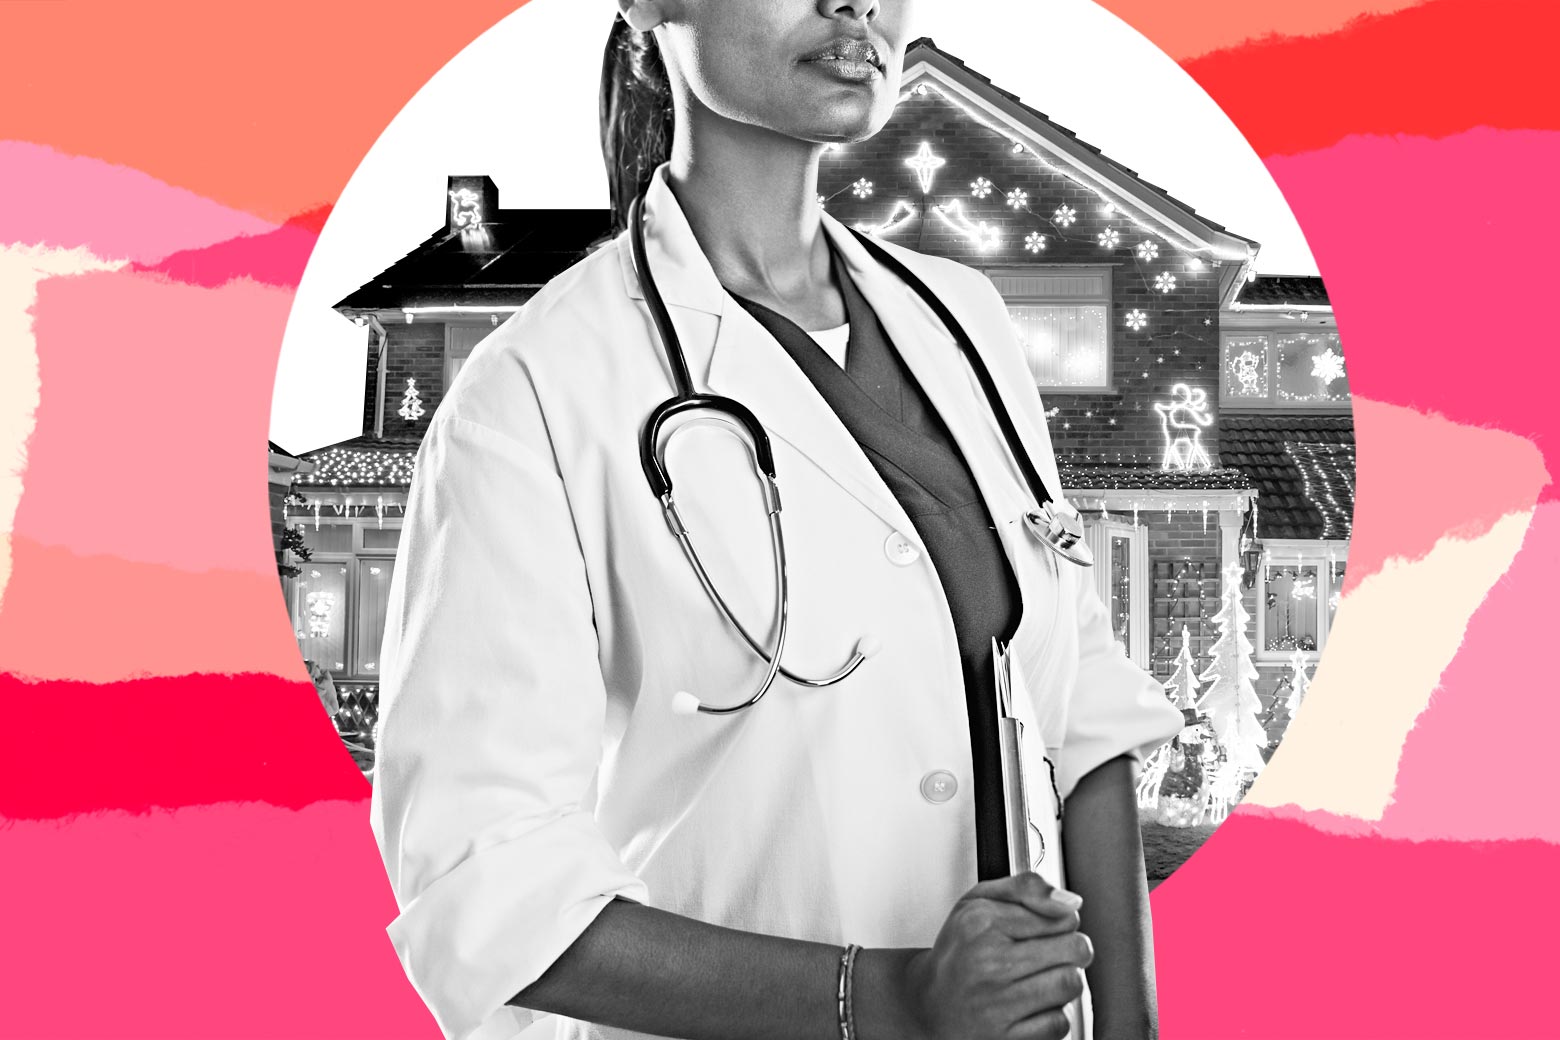 Collage of a female doctor standing proudly in a lab coat, with a stethoscope around her neck and a medical chart in her hand, and a house covered in Christmas decorations in the background.